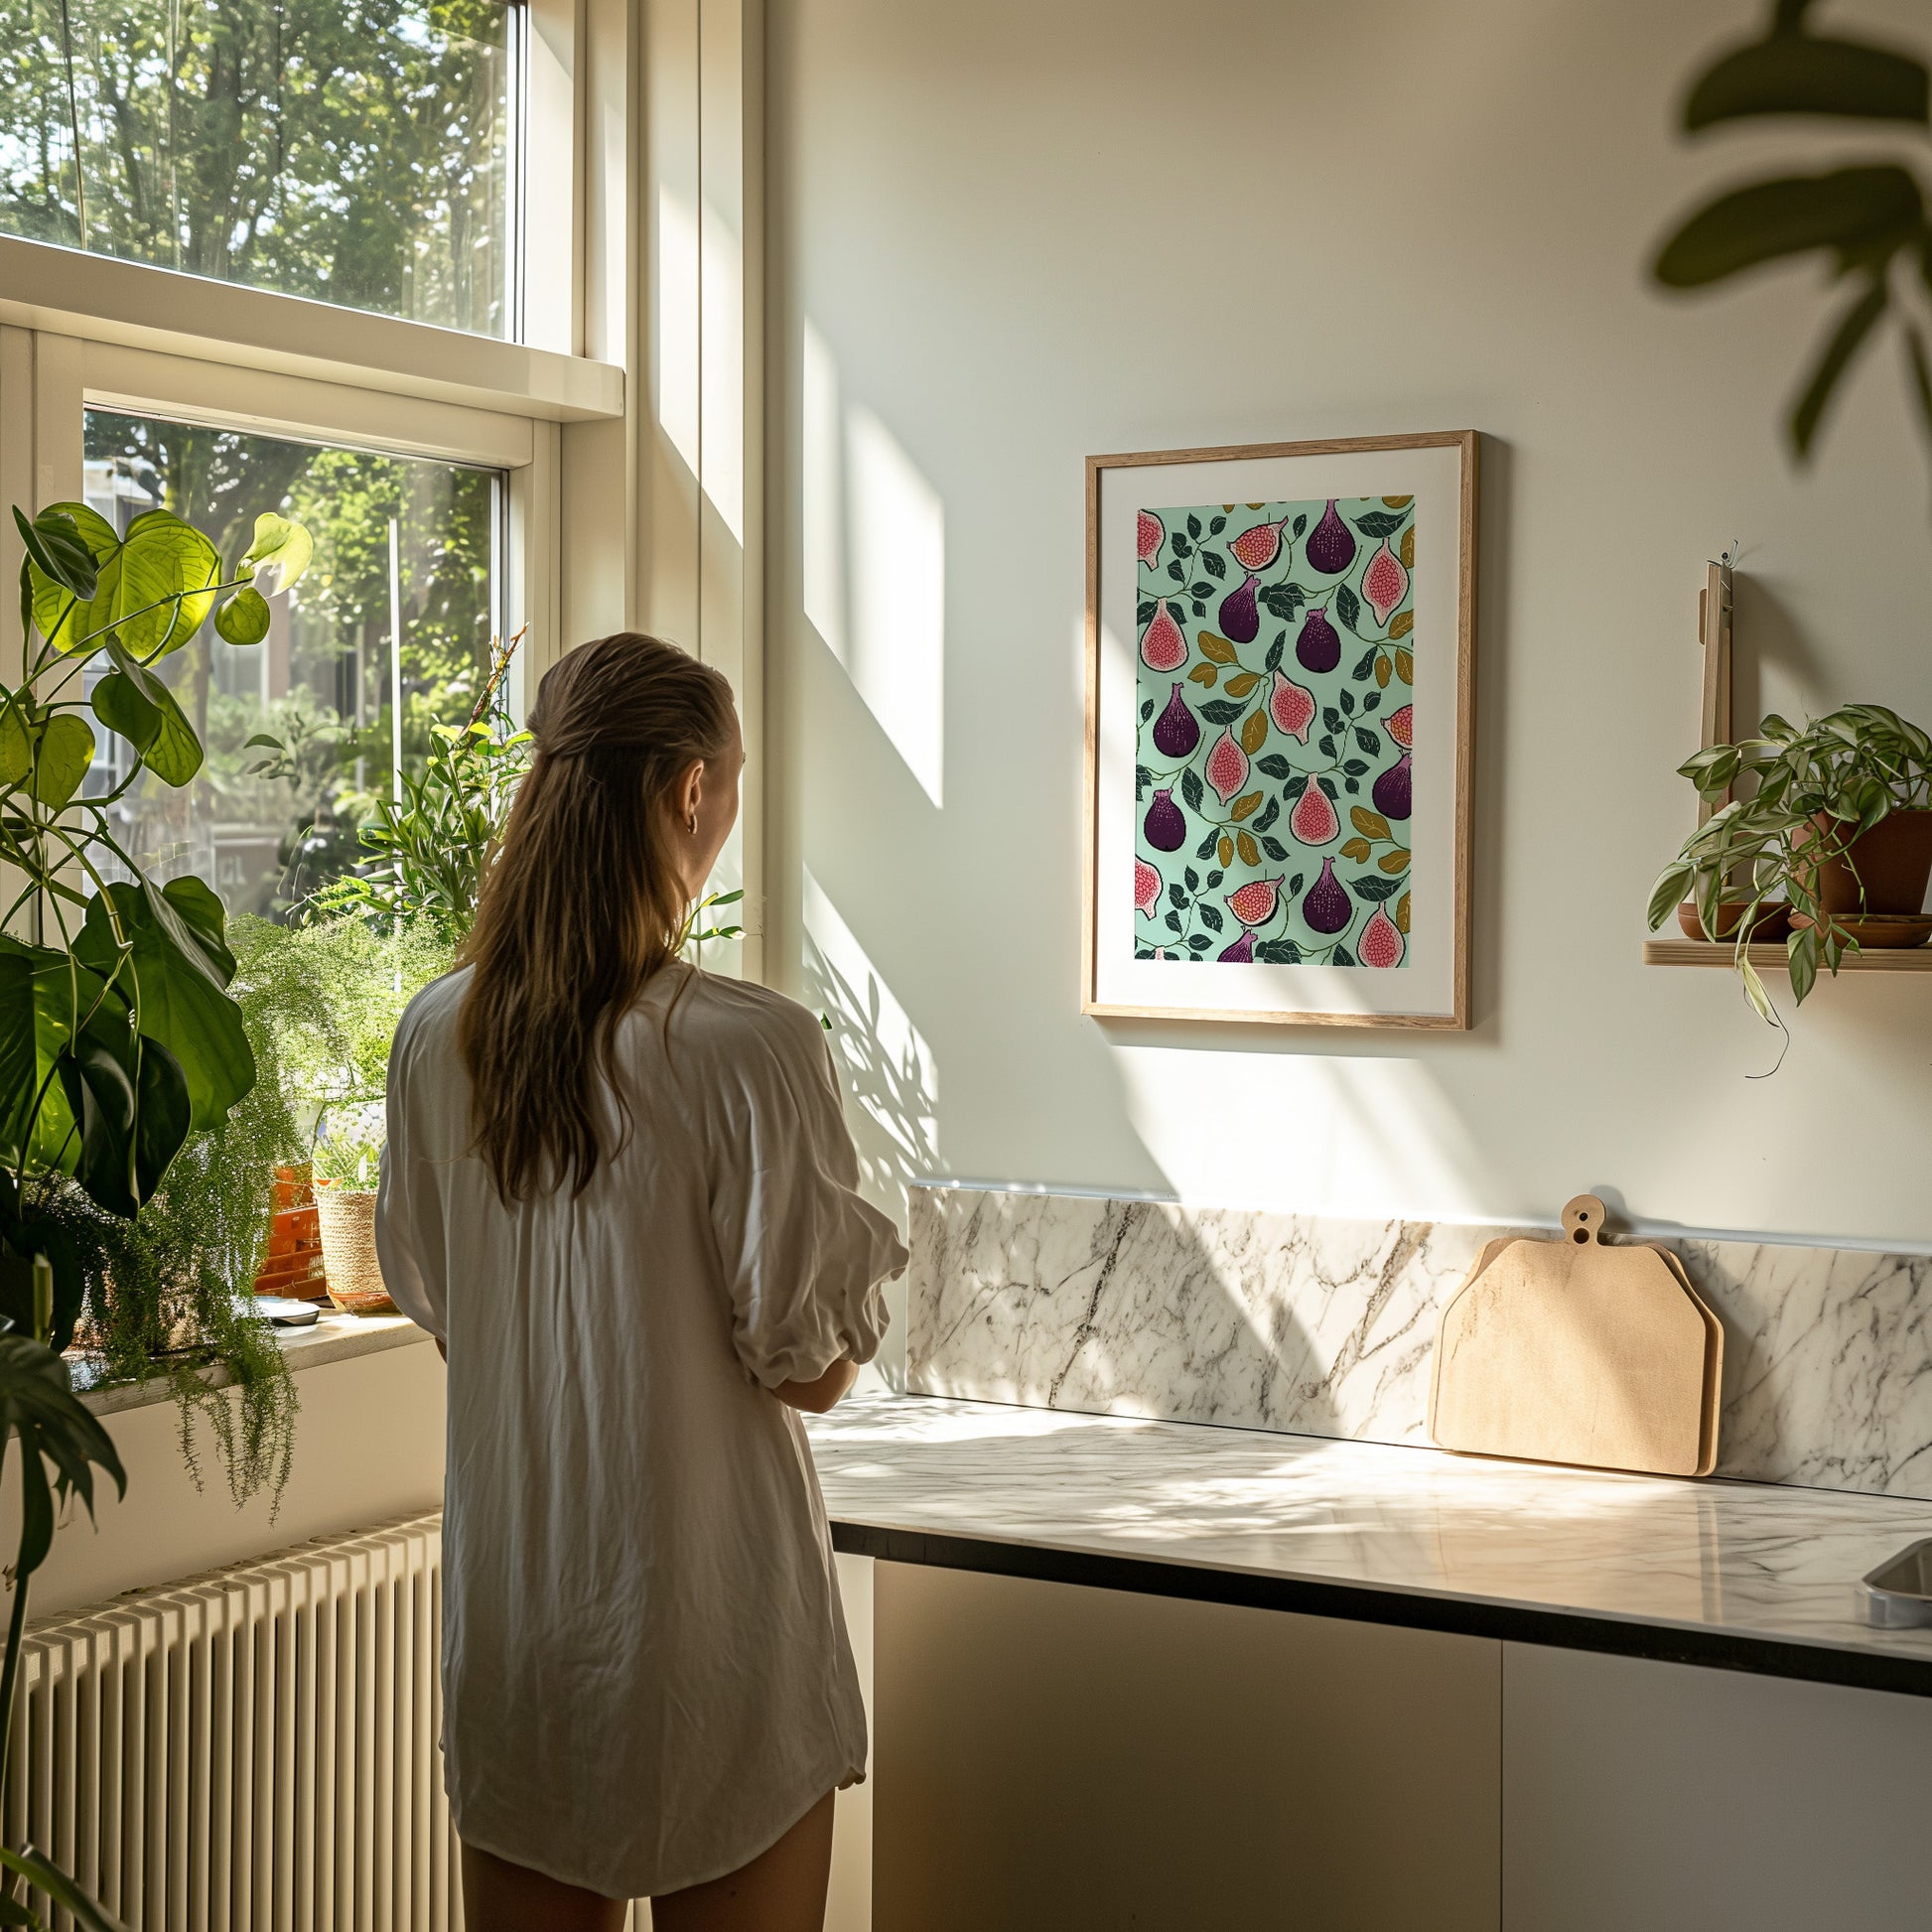 Woman in a white shirt gazing out a sunny window in a kitchen with plants.